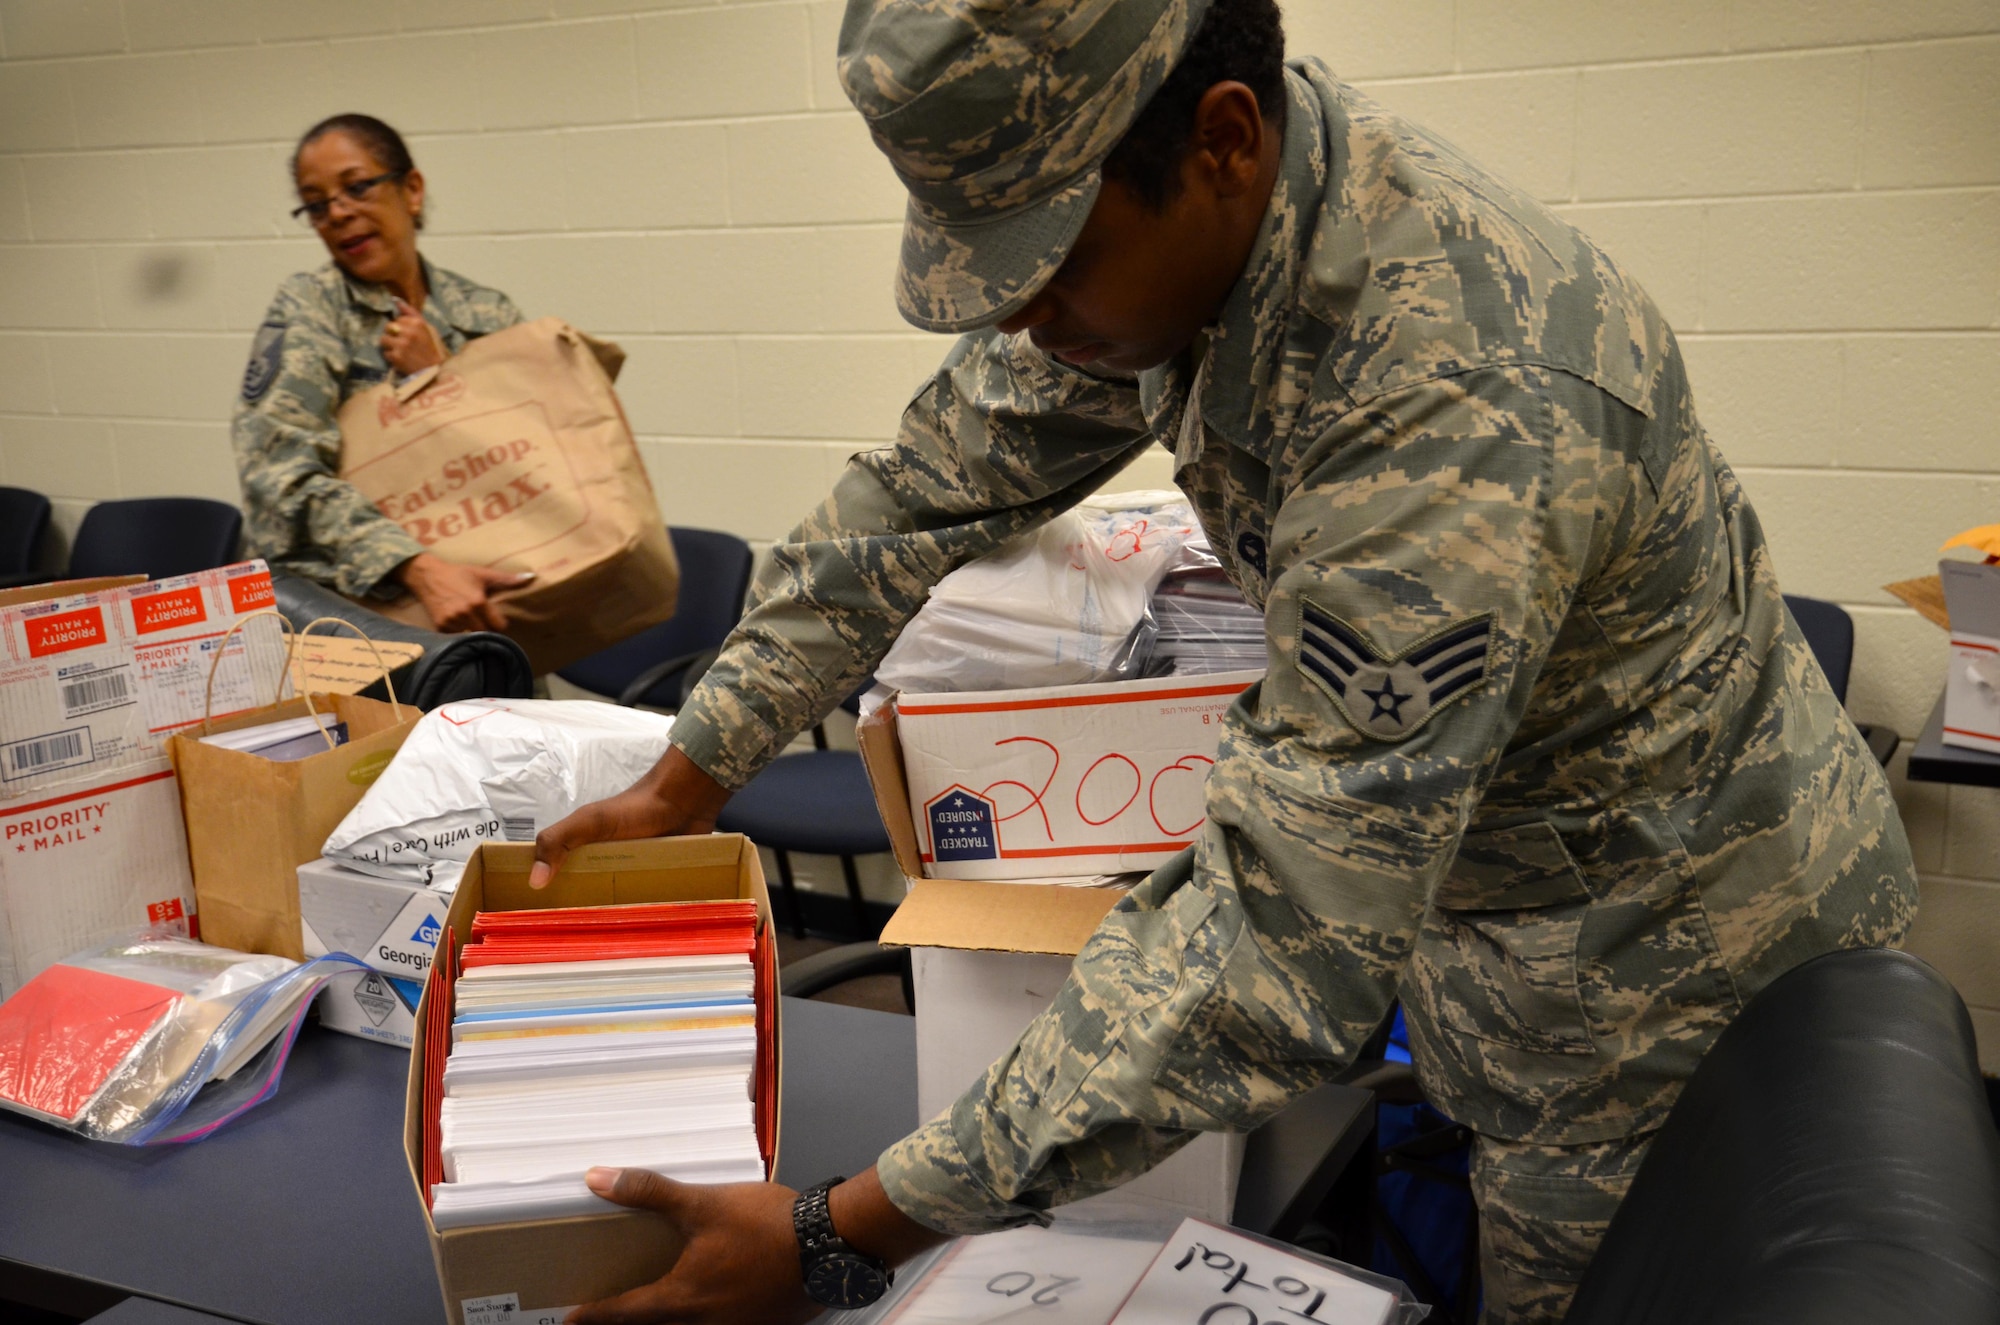 Senior Airman Justin Holt, 94th AW Aircraft Maintenance Squadron specialist, and other Airmen from the 94 Airlift wing came to help unload and receive the generous donation of holiday cards for deployed troops on October 25, 2016 at Dobbins Air Reserve Base, Georgia. The Eastern Stars gave over 10,000 cards to be sent to troops that may not be in the company of family this holiday. (U.S. Air Force photo by Senior Airman Lauren Douglas)